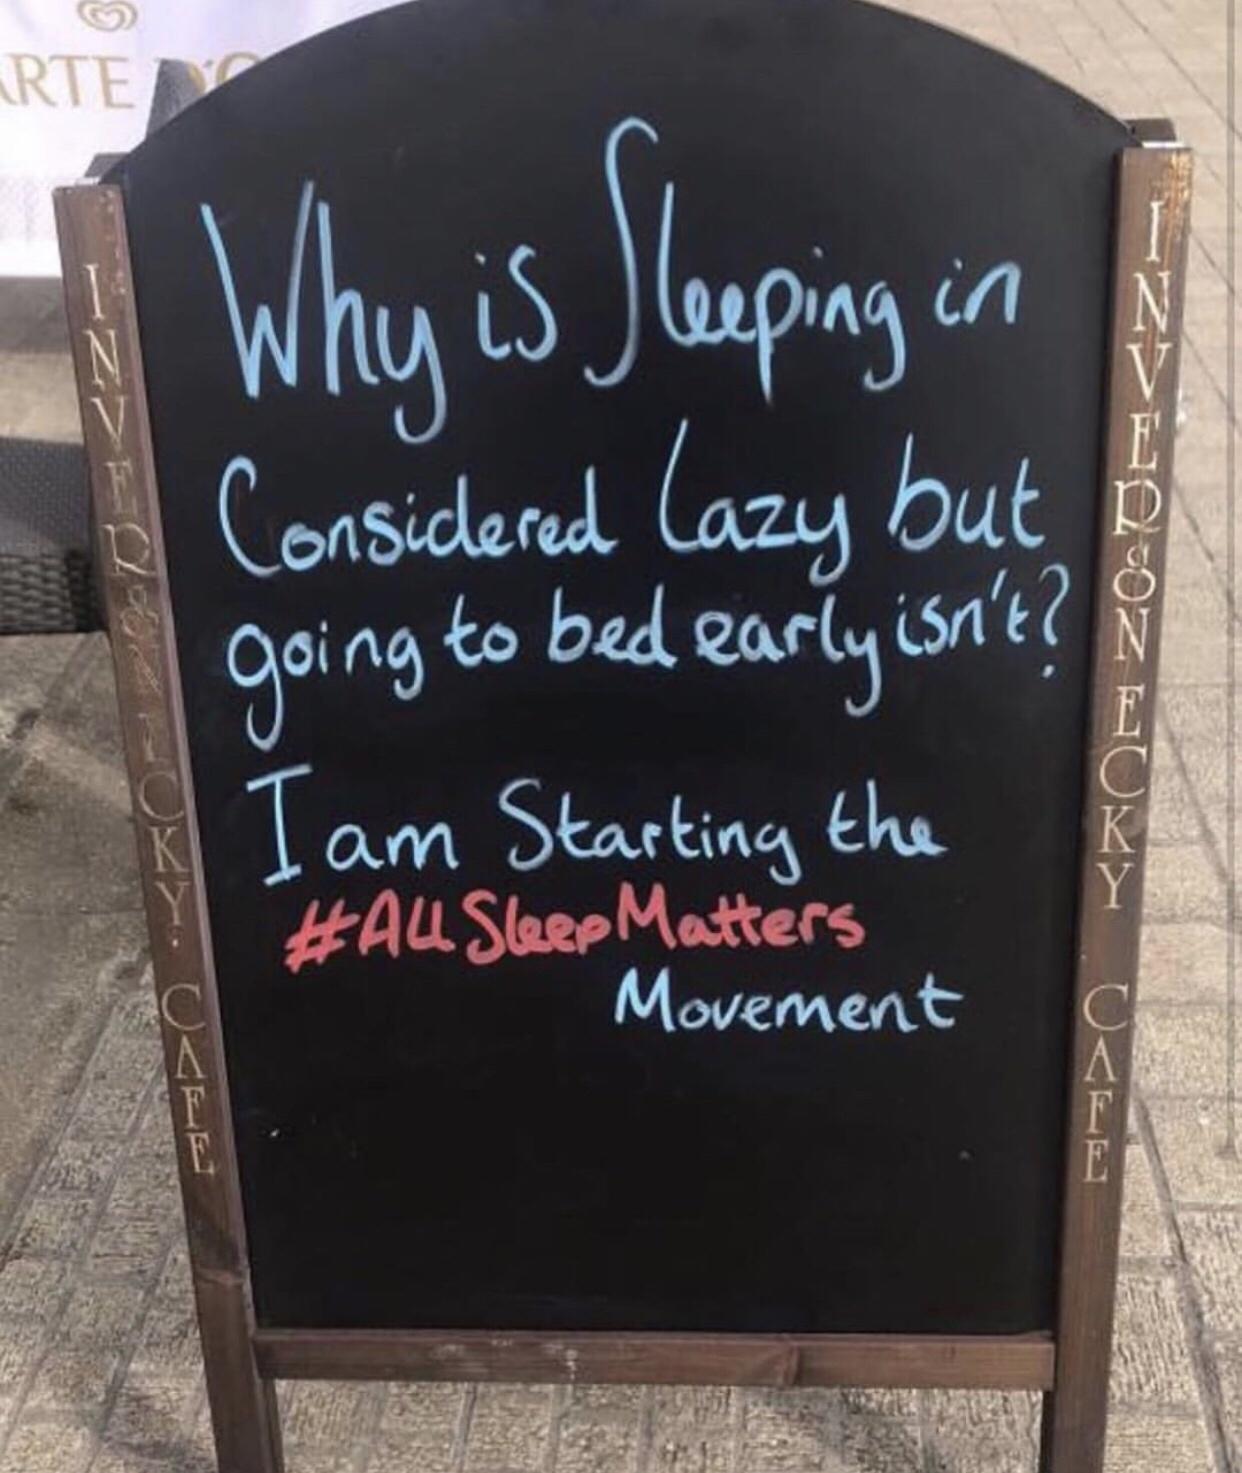 funny signs meme - Arte I Why is Sleeping i Considered Lazy but I going to bed early isn't? I am Starting the E C K Y Sleep Matters Movement Ocee O